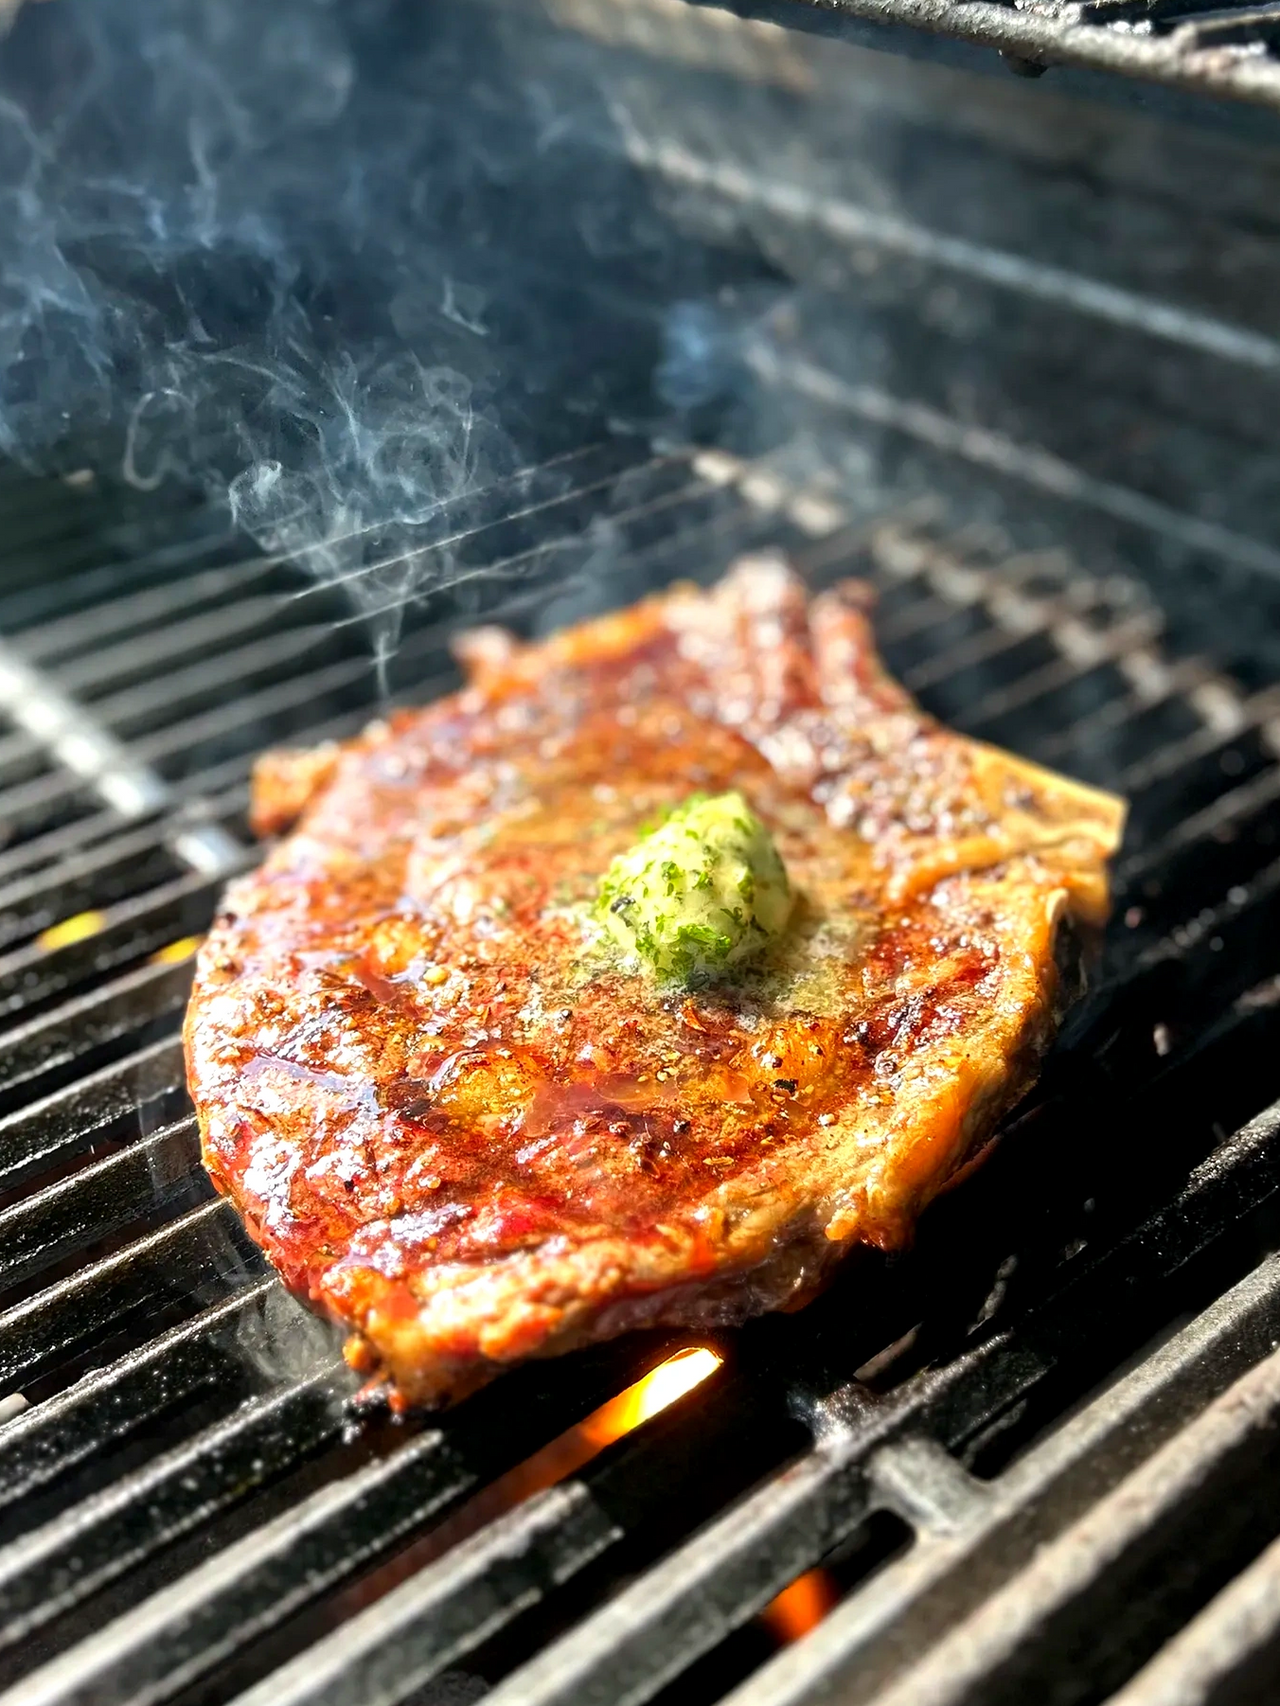 Steak cooked on a grill, smoke in the background